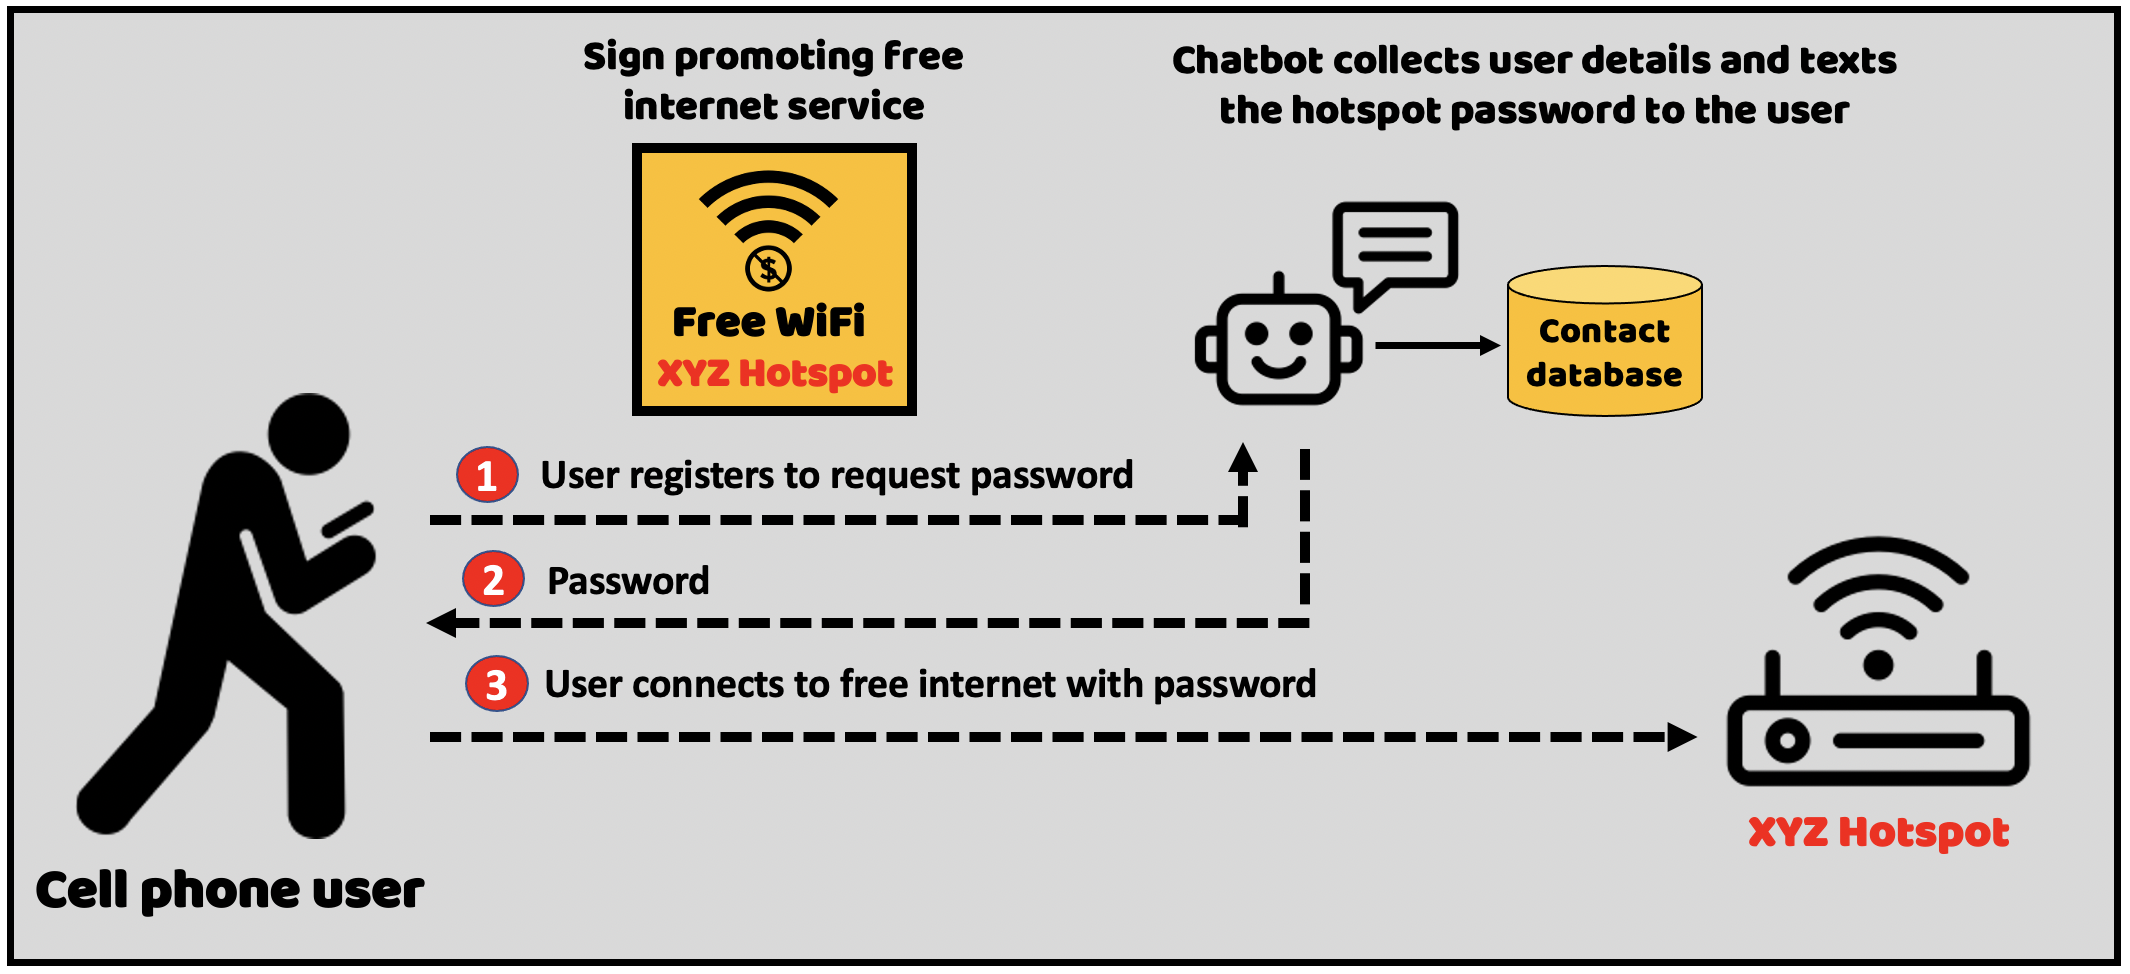 Use WiFi hotspots to provide free internet access in order to build double opt-in contact lists.